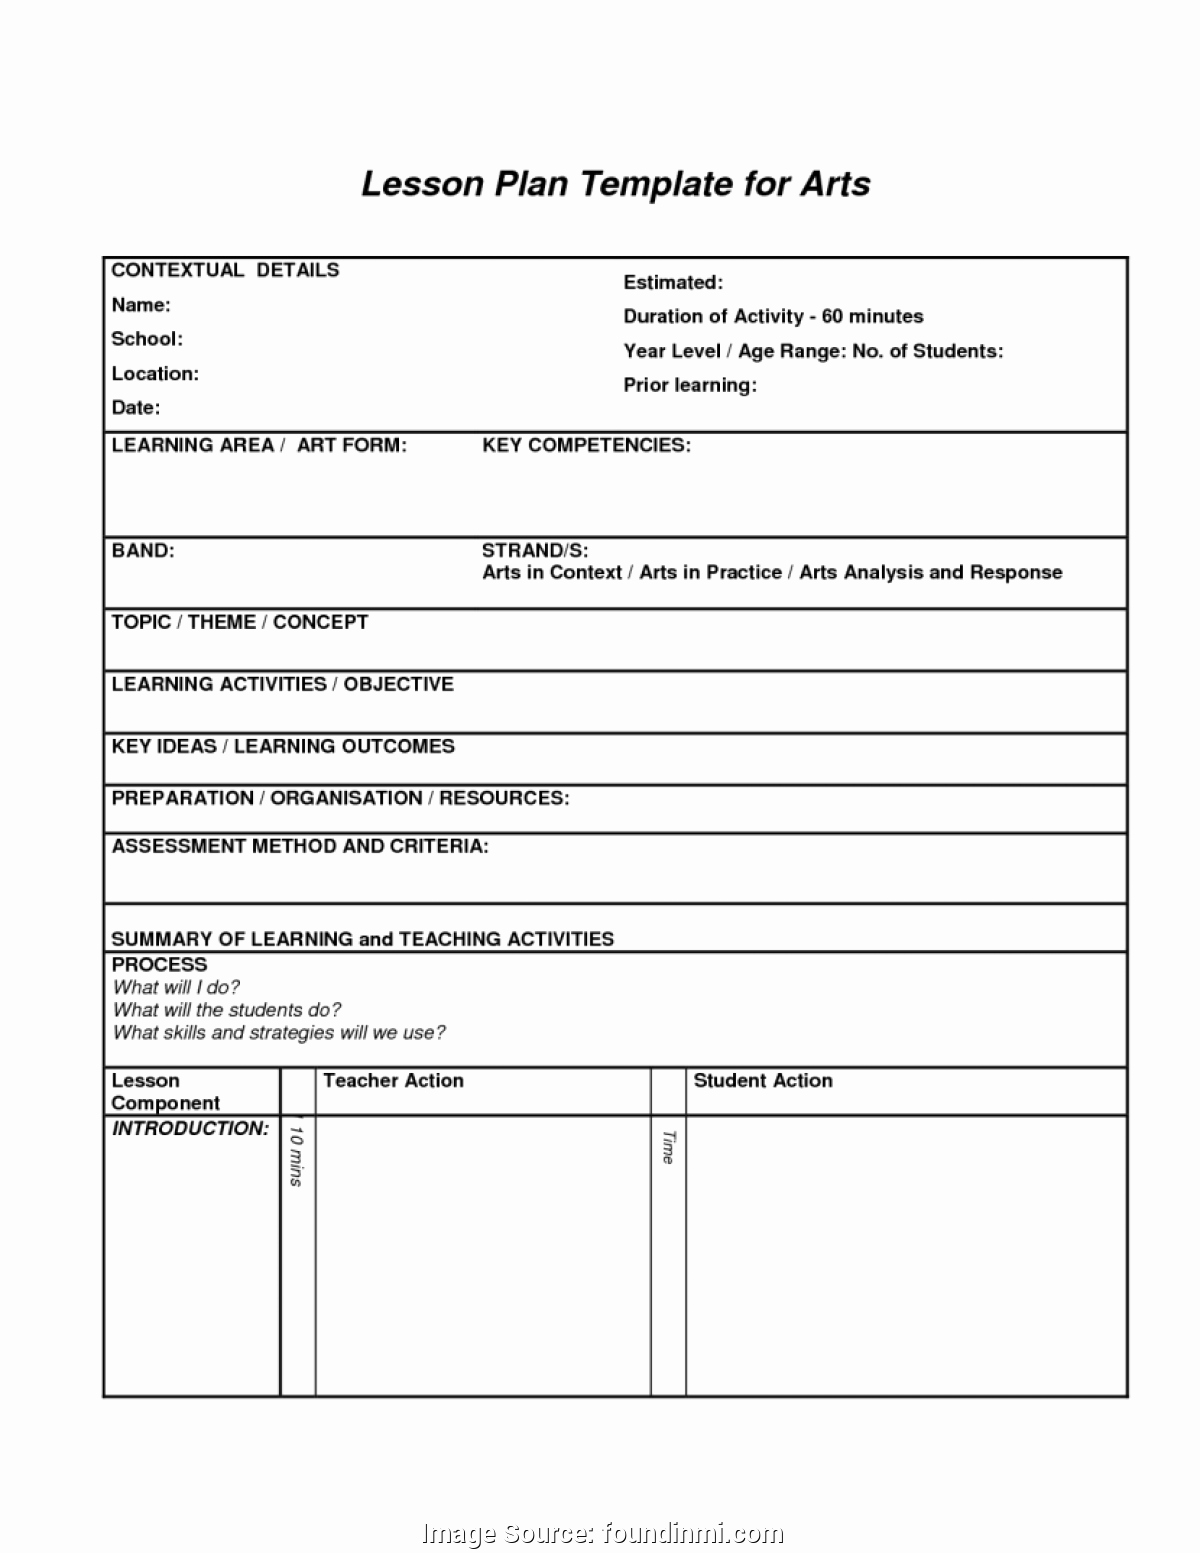 Backwards Design Unit Plan Template Lovely Fresh Lessons Learned Checklist Template Lessons Learnt